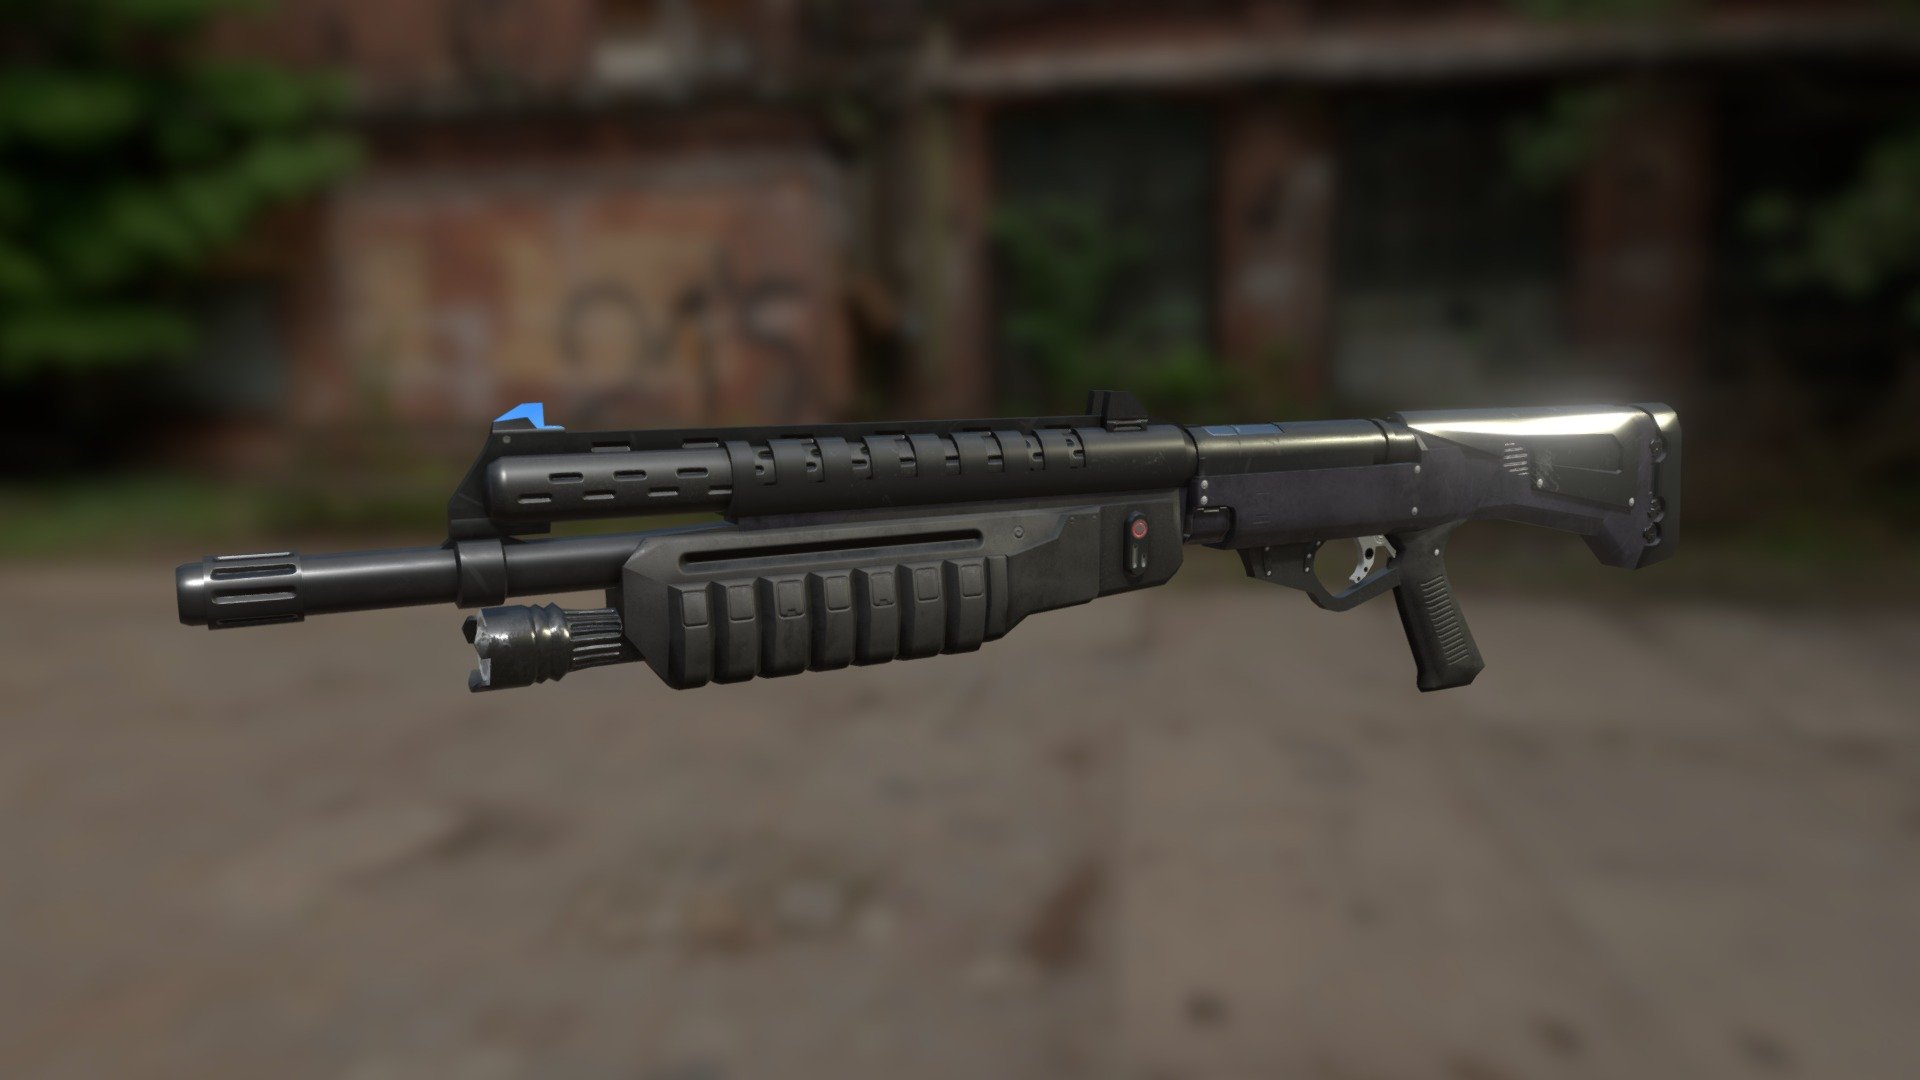 My attempt at remaking the M90 Shotgun from the Halo Universe. The concept was done with the idea in mind of using the Halo 2 Anniversary style of the shotgun but more tuned to the Halo 3 proportions of the shotgun.

Modelled in Maya, textures done in Substaince Painter.

Feedback is welcome, as is constructive criticism 3d model